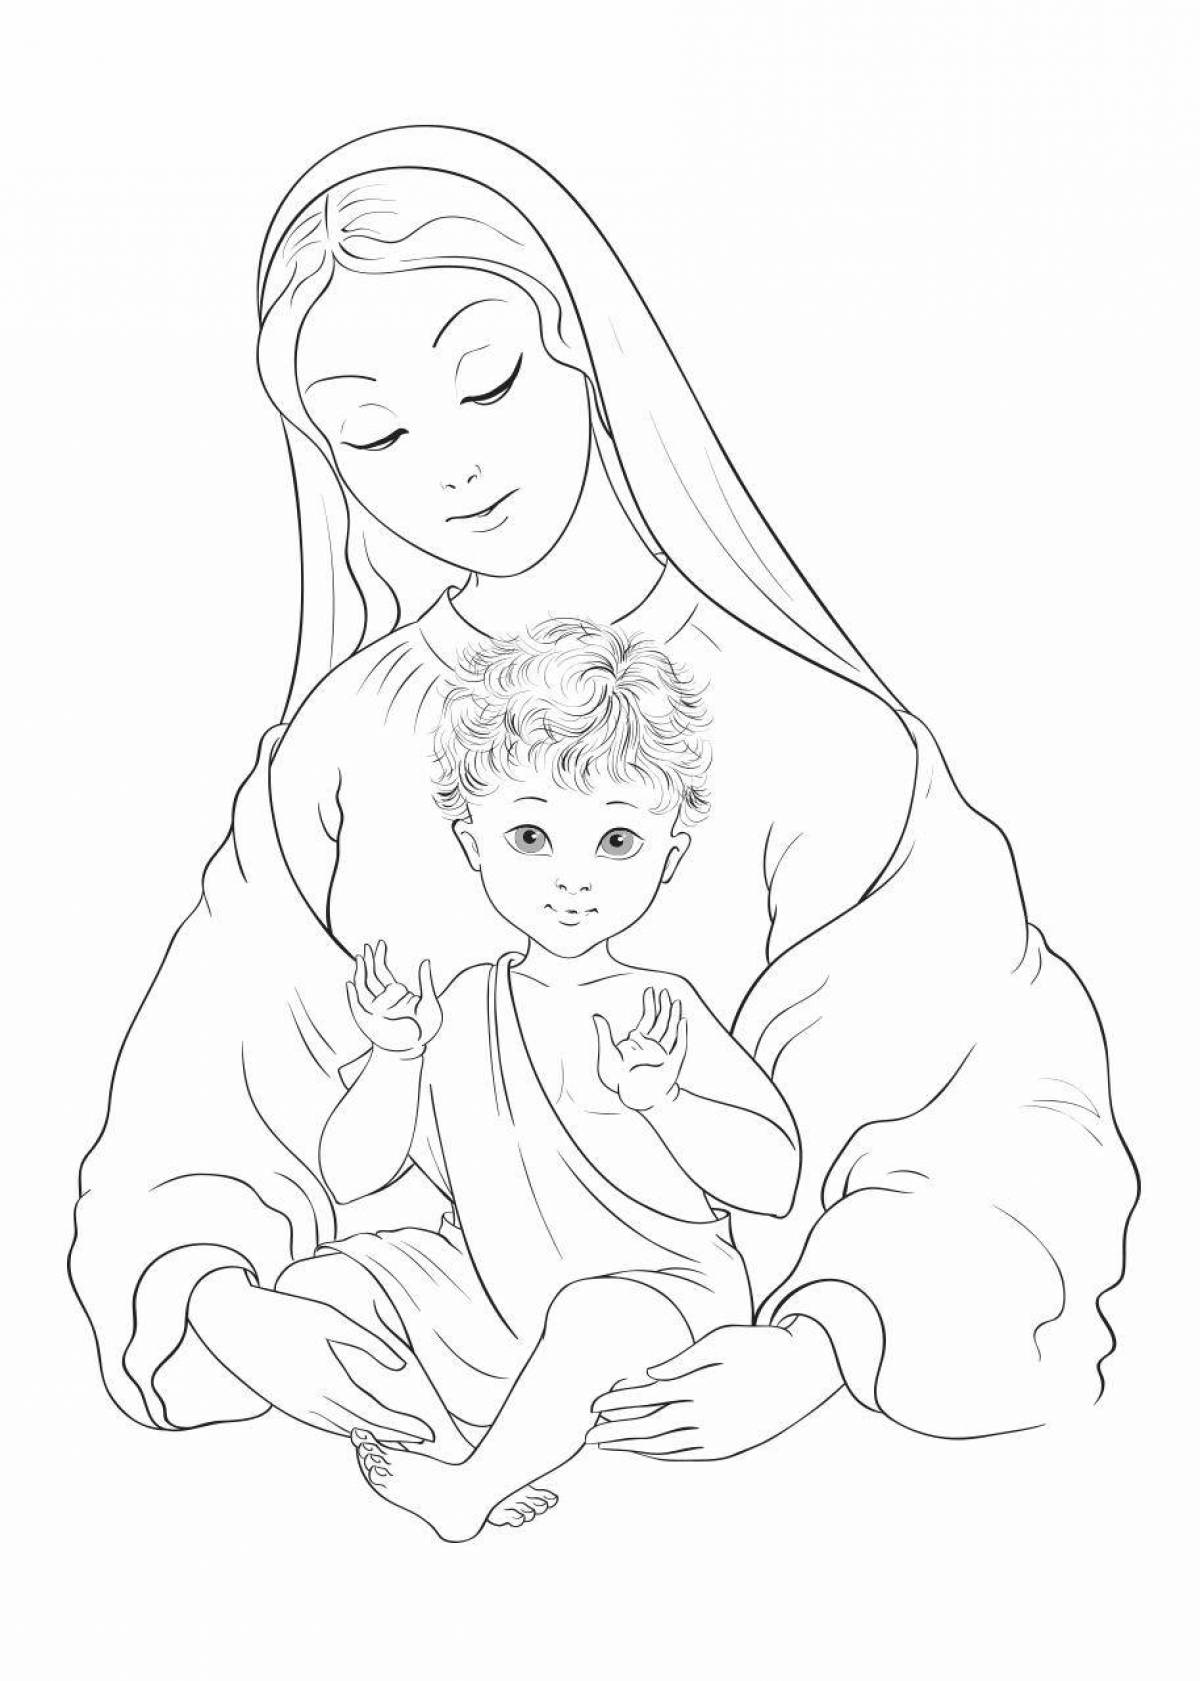 Great coloring of the virgin mary and child